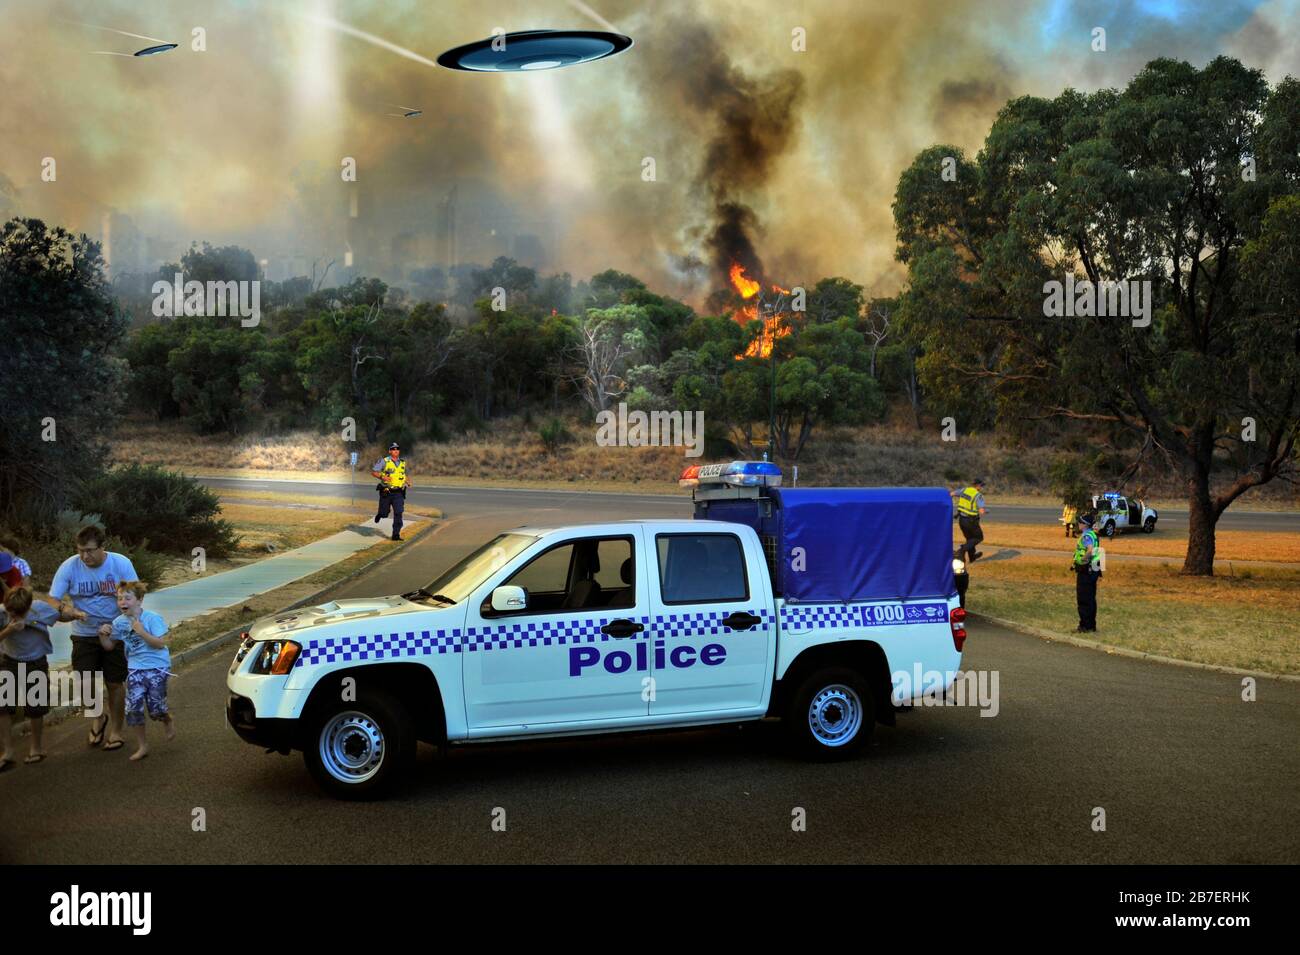 An urban environment under attack by a swarm of UFO's, with burning foliage, rays and people running. A police vehicle is in centre of frame. Stock Photo